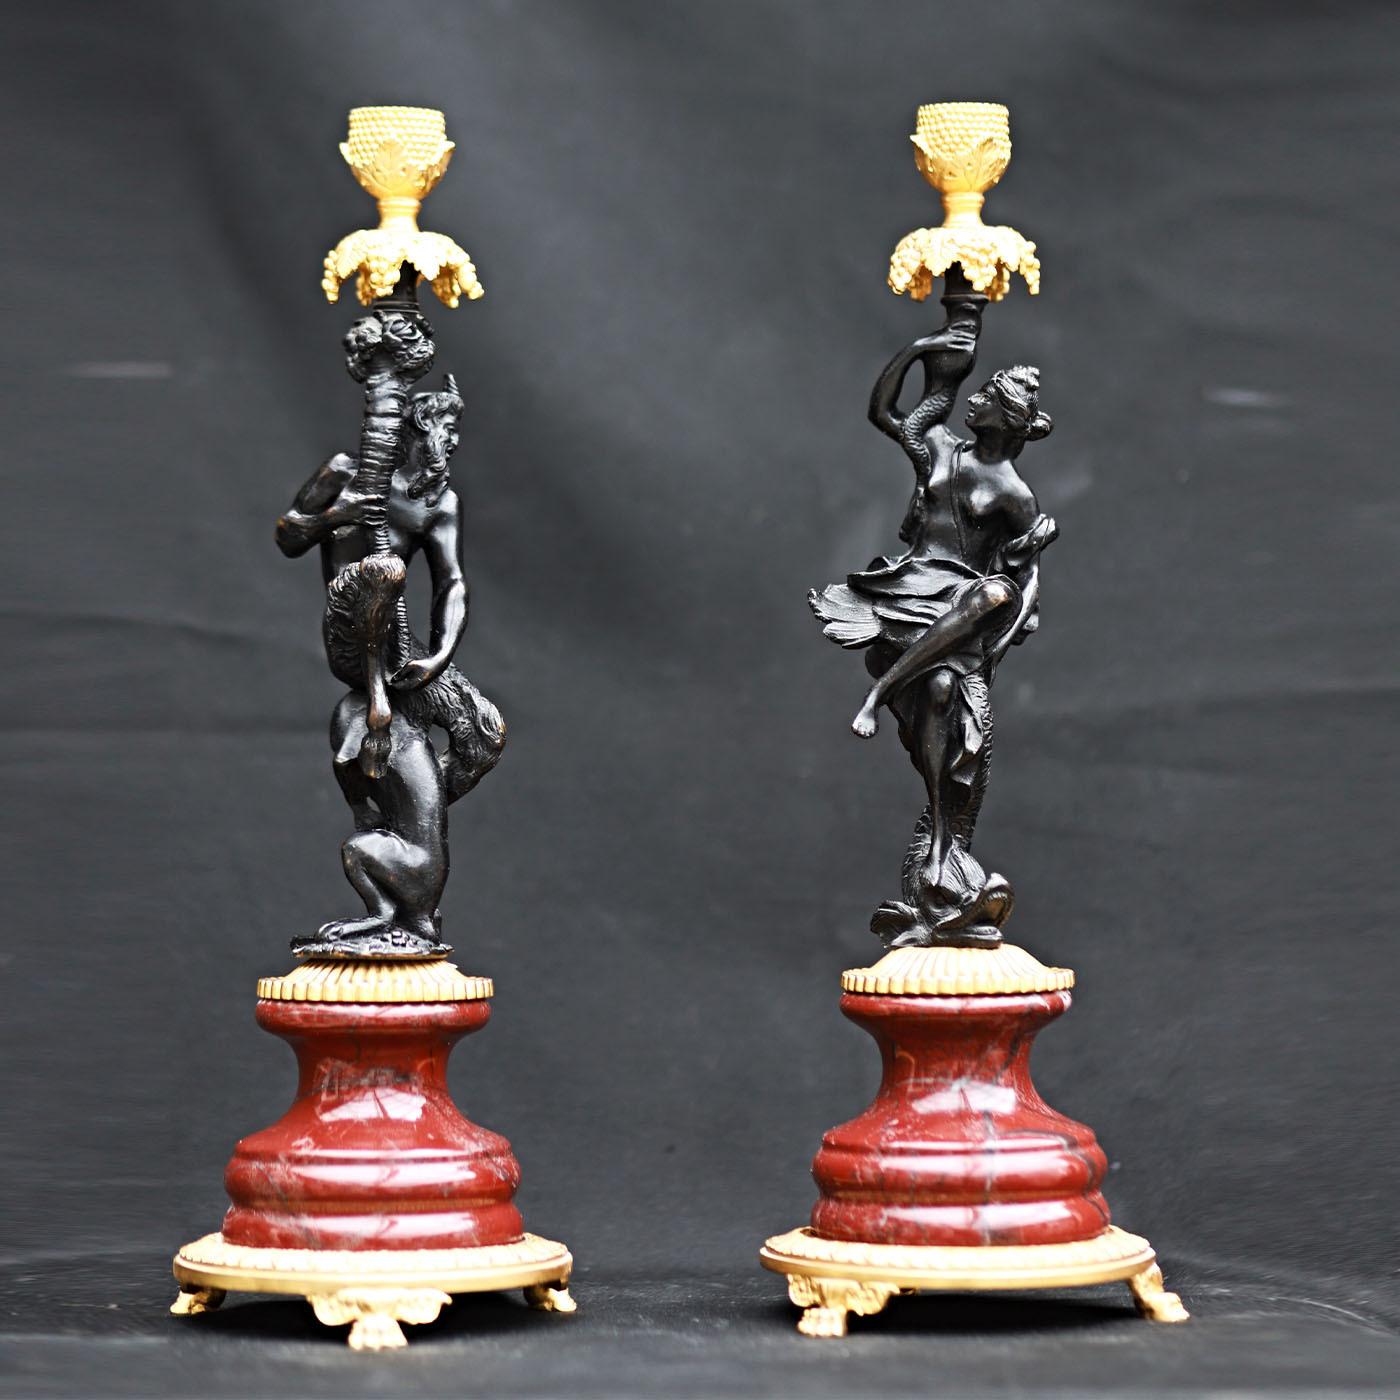 The two sculptural candleholders composing this set boast a precious silhouette combining hand-chiseled bronze statuettes with brass and fine Rosso Levanto marble. A faun and a maid respectively, the anthropomorphic figures sport a deep black finish